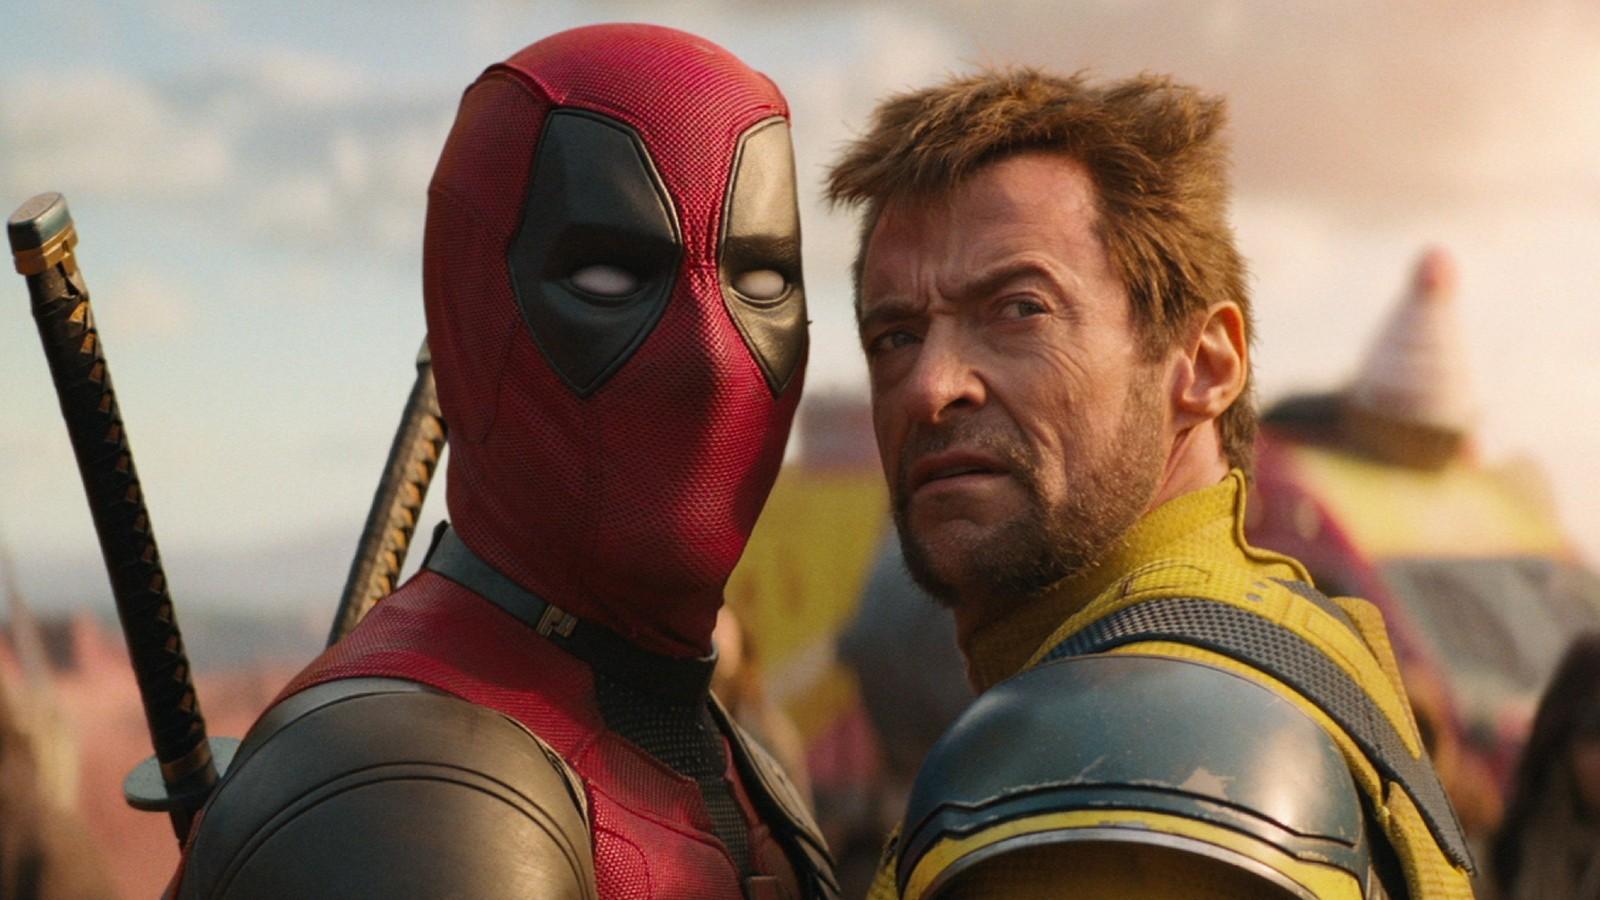 Deadpool and Wolverine in the new movie